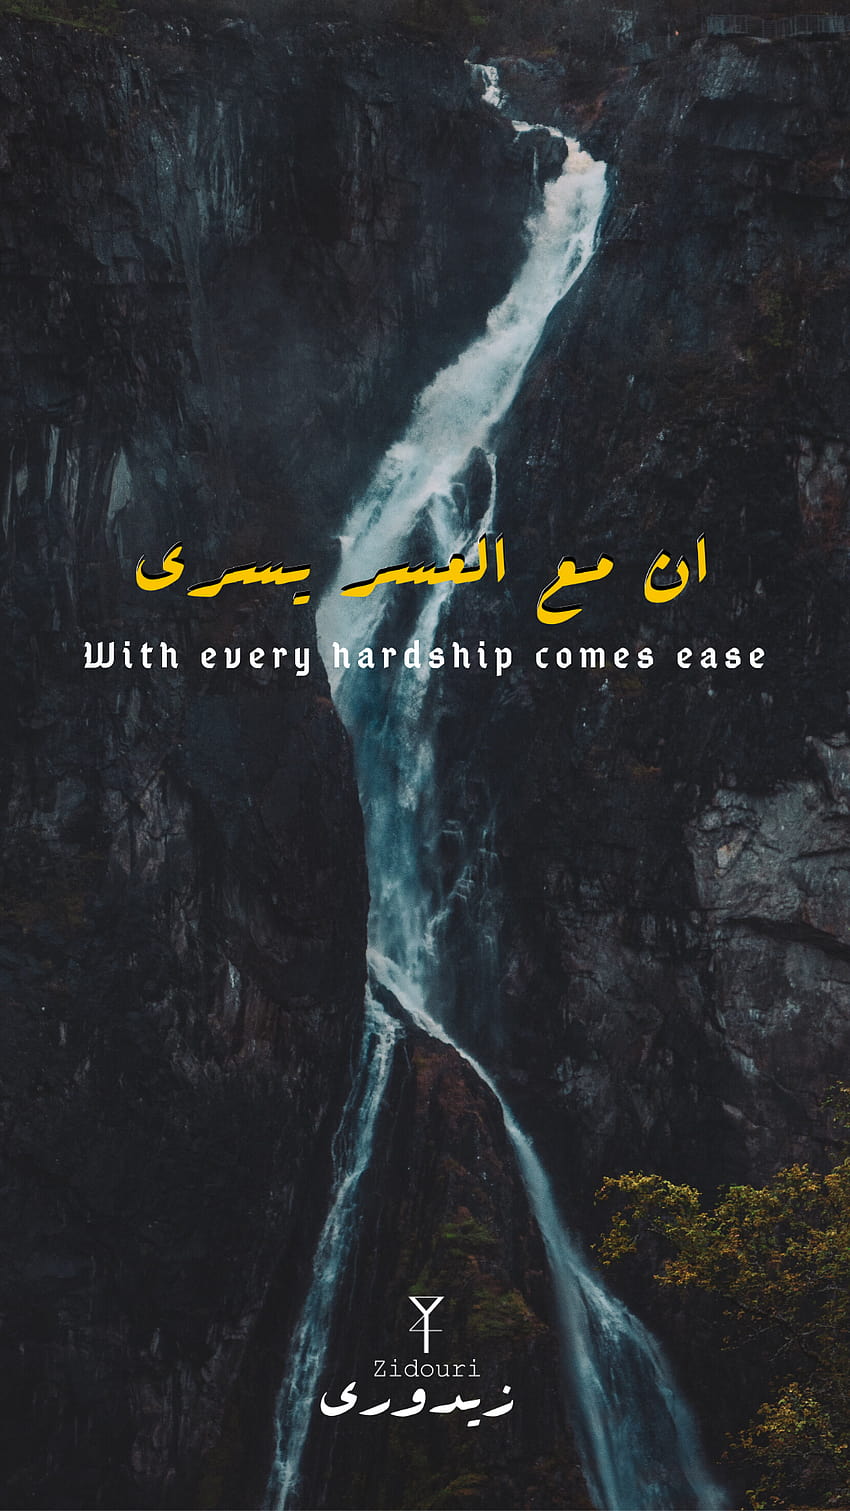 With Every Hardship comes ease V3 HD phone wallpaper